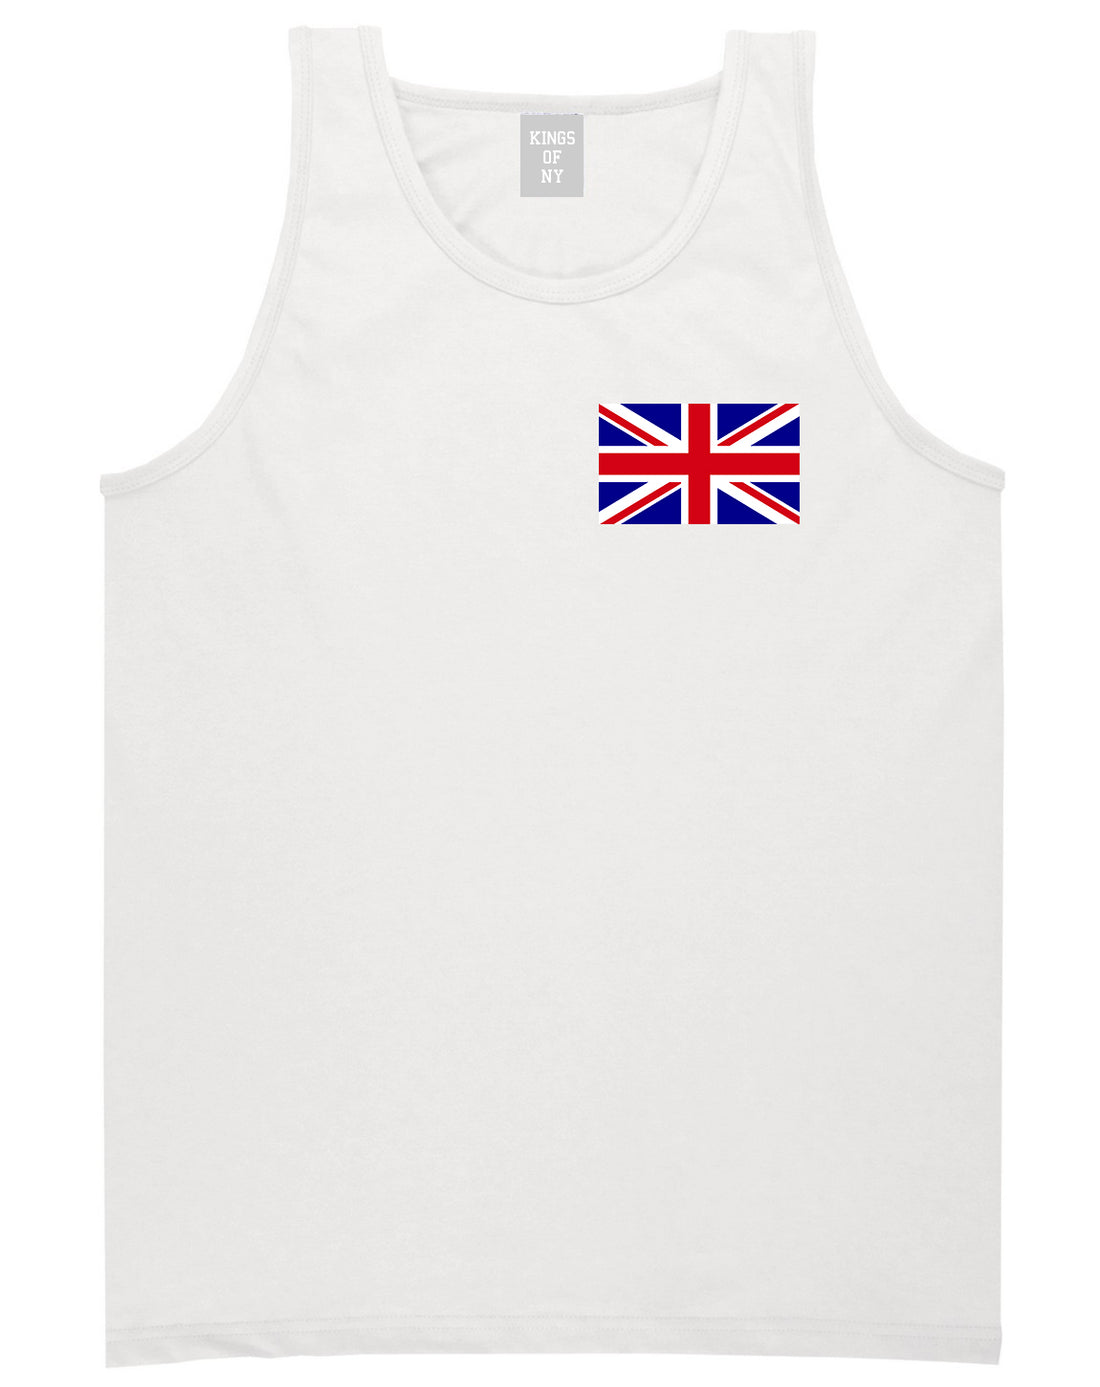 English England Flag Chest Mens White Tank Top Shirt by KINGS OF NY